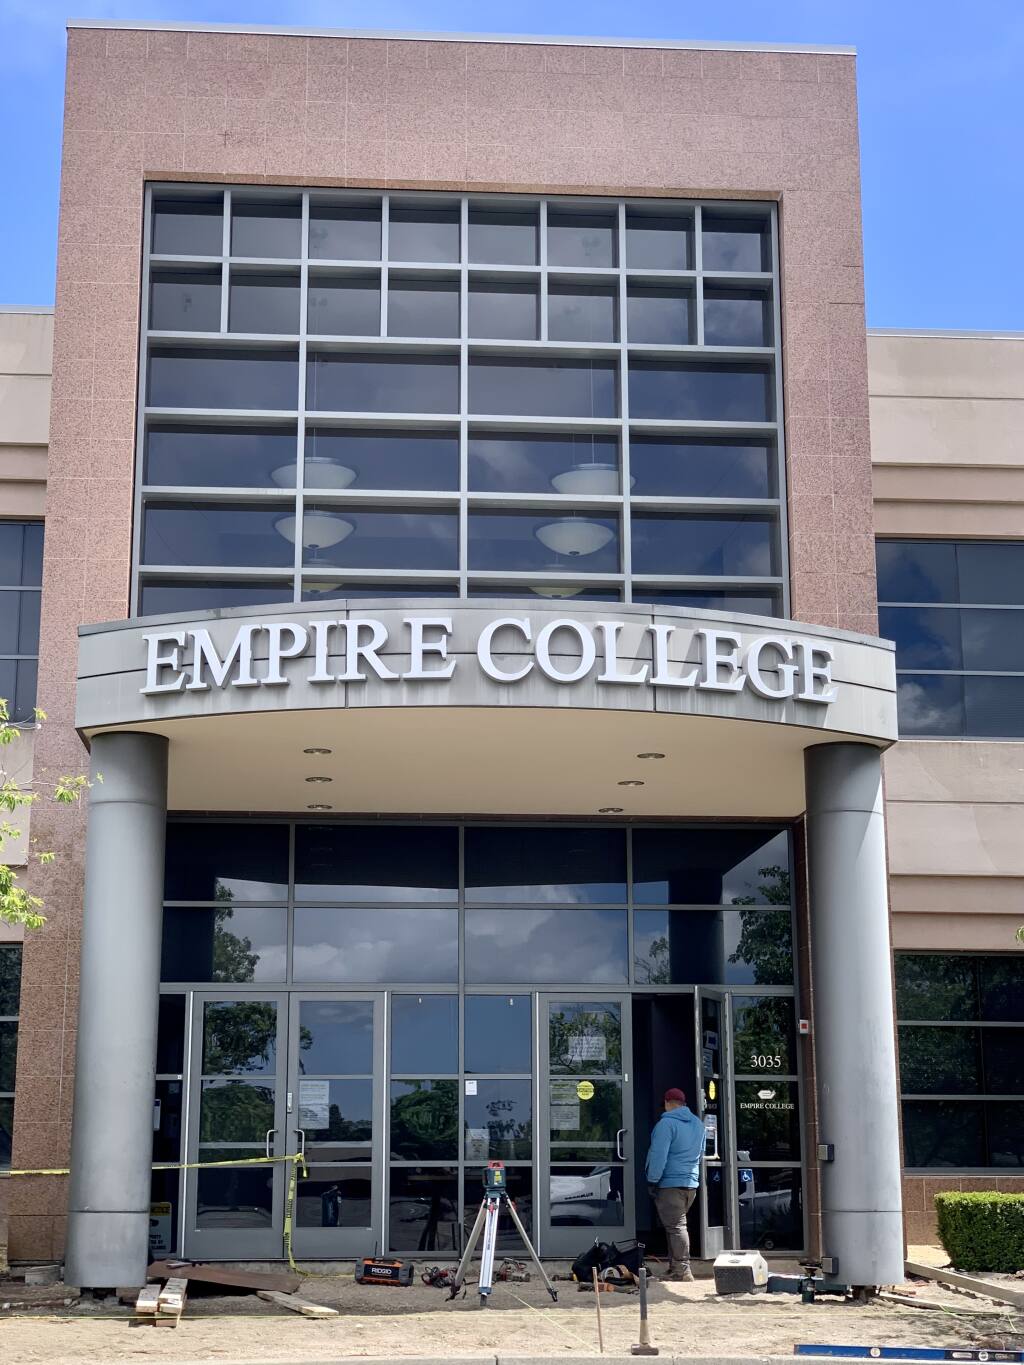 A work crew prepares the first floor of the Empire College building at 3035 Cleveland Ave. in Santa Rosa on Monday, May 9, 2022, for Eye Care Institute, which is consolidating other Sonoma County locations there in June. After the closing of the School of Business, effective at the end of 2021, the School of Law will occupy part of the second floor. (Jeff Quackenbush / North Bay Business Journal)